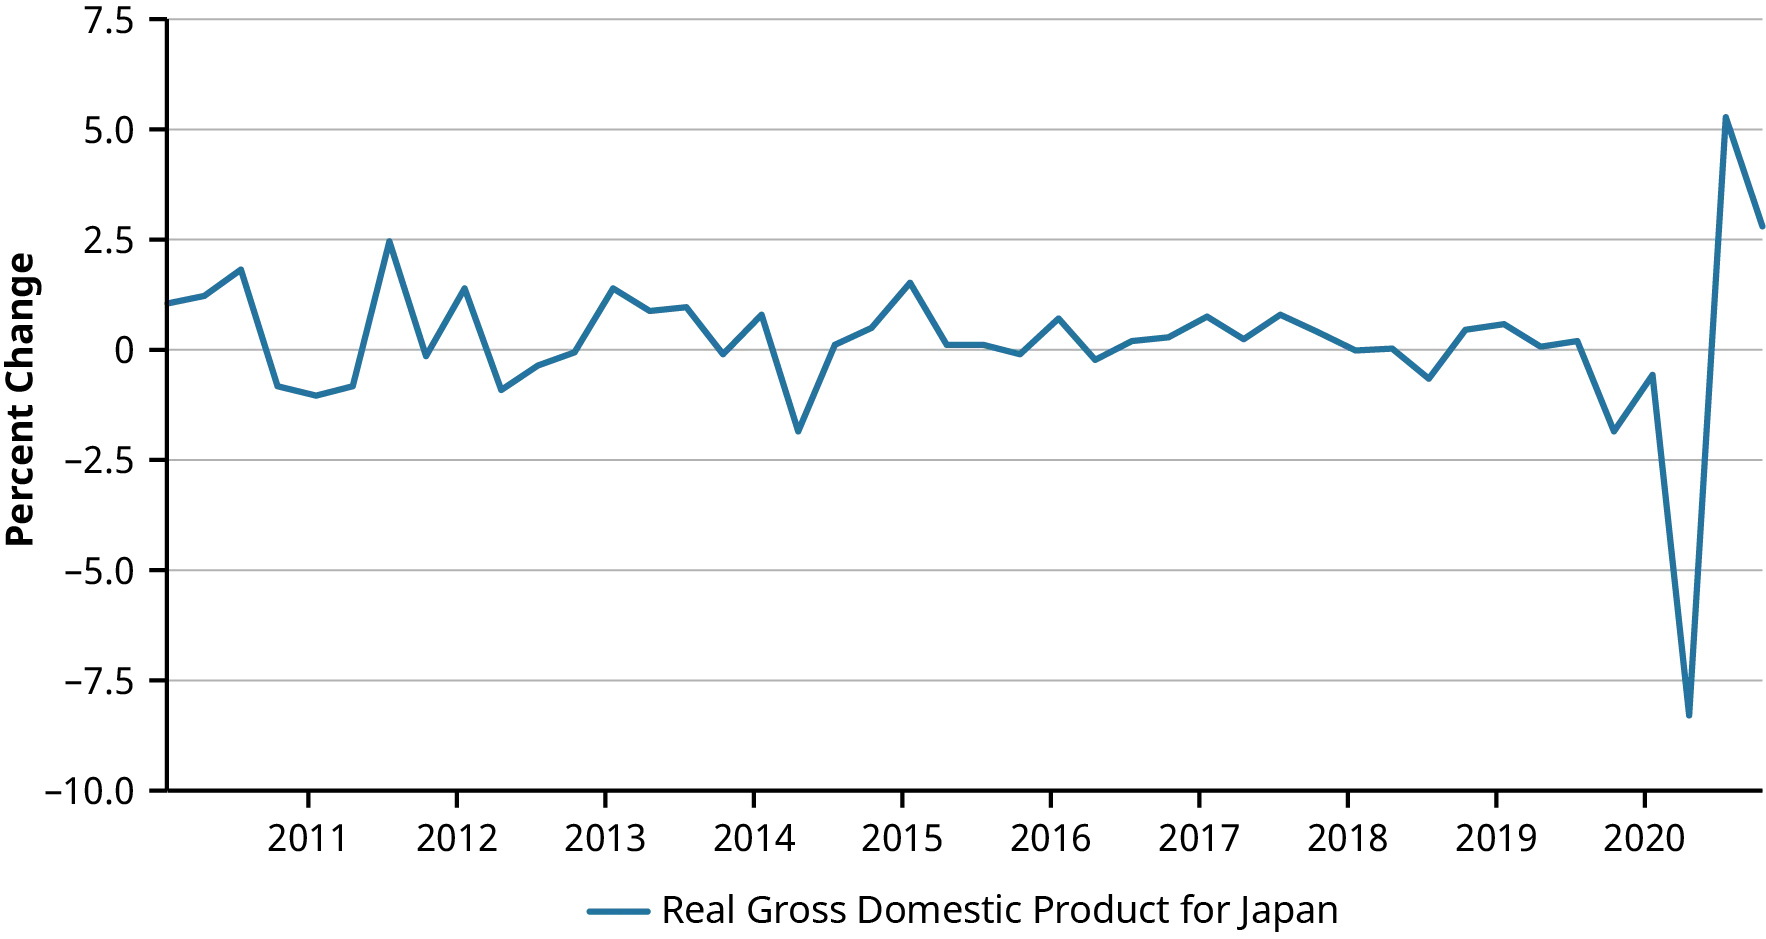 Graphical representation of percent change for Gross Domestic Product for Japan, 2010–2020. It shows that the real GDP for Japan was steady from 2011 to 2020, never falling below negative 2.5 percent change or rising above 2.5 percent change. In 2020, the percent change went to more than negative 7.5 percent before quickly rising to 5 percent change.